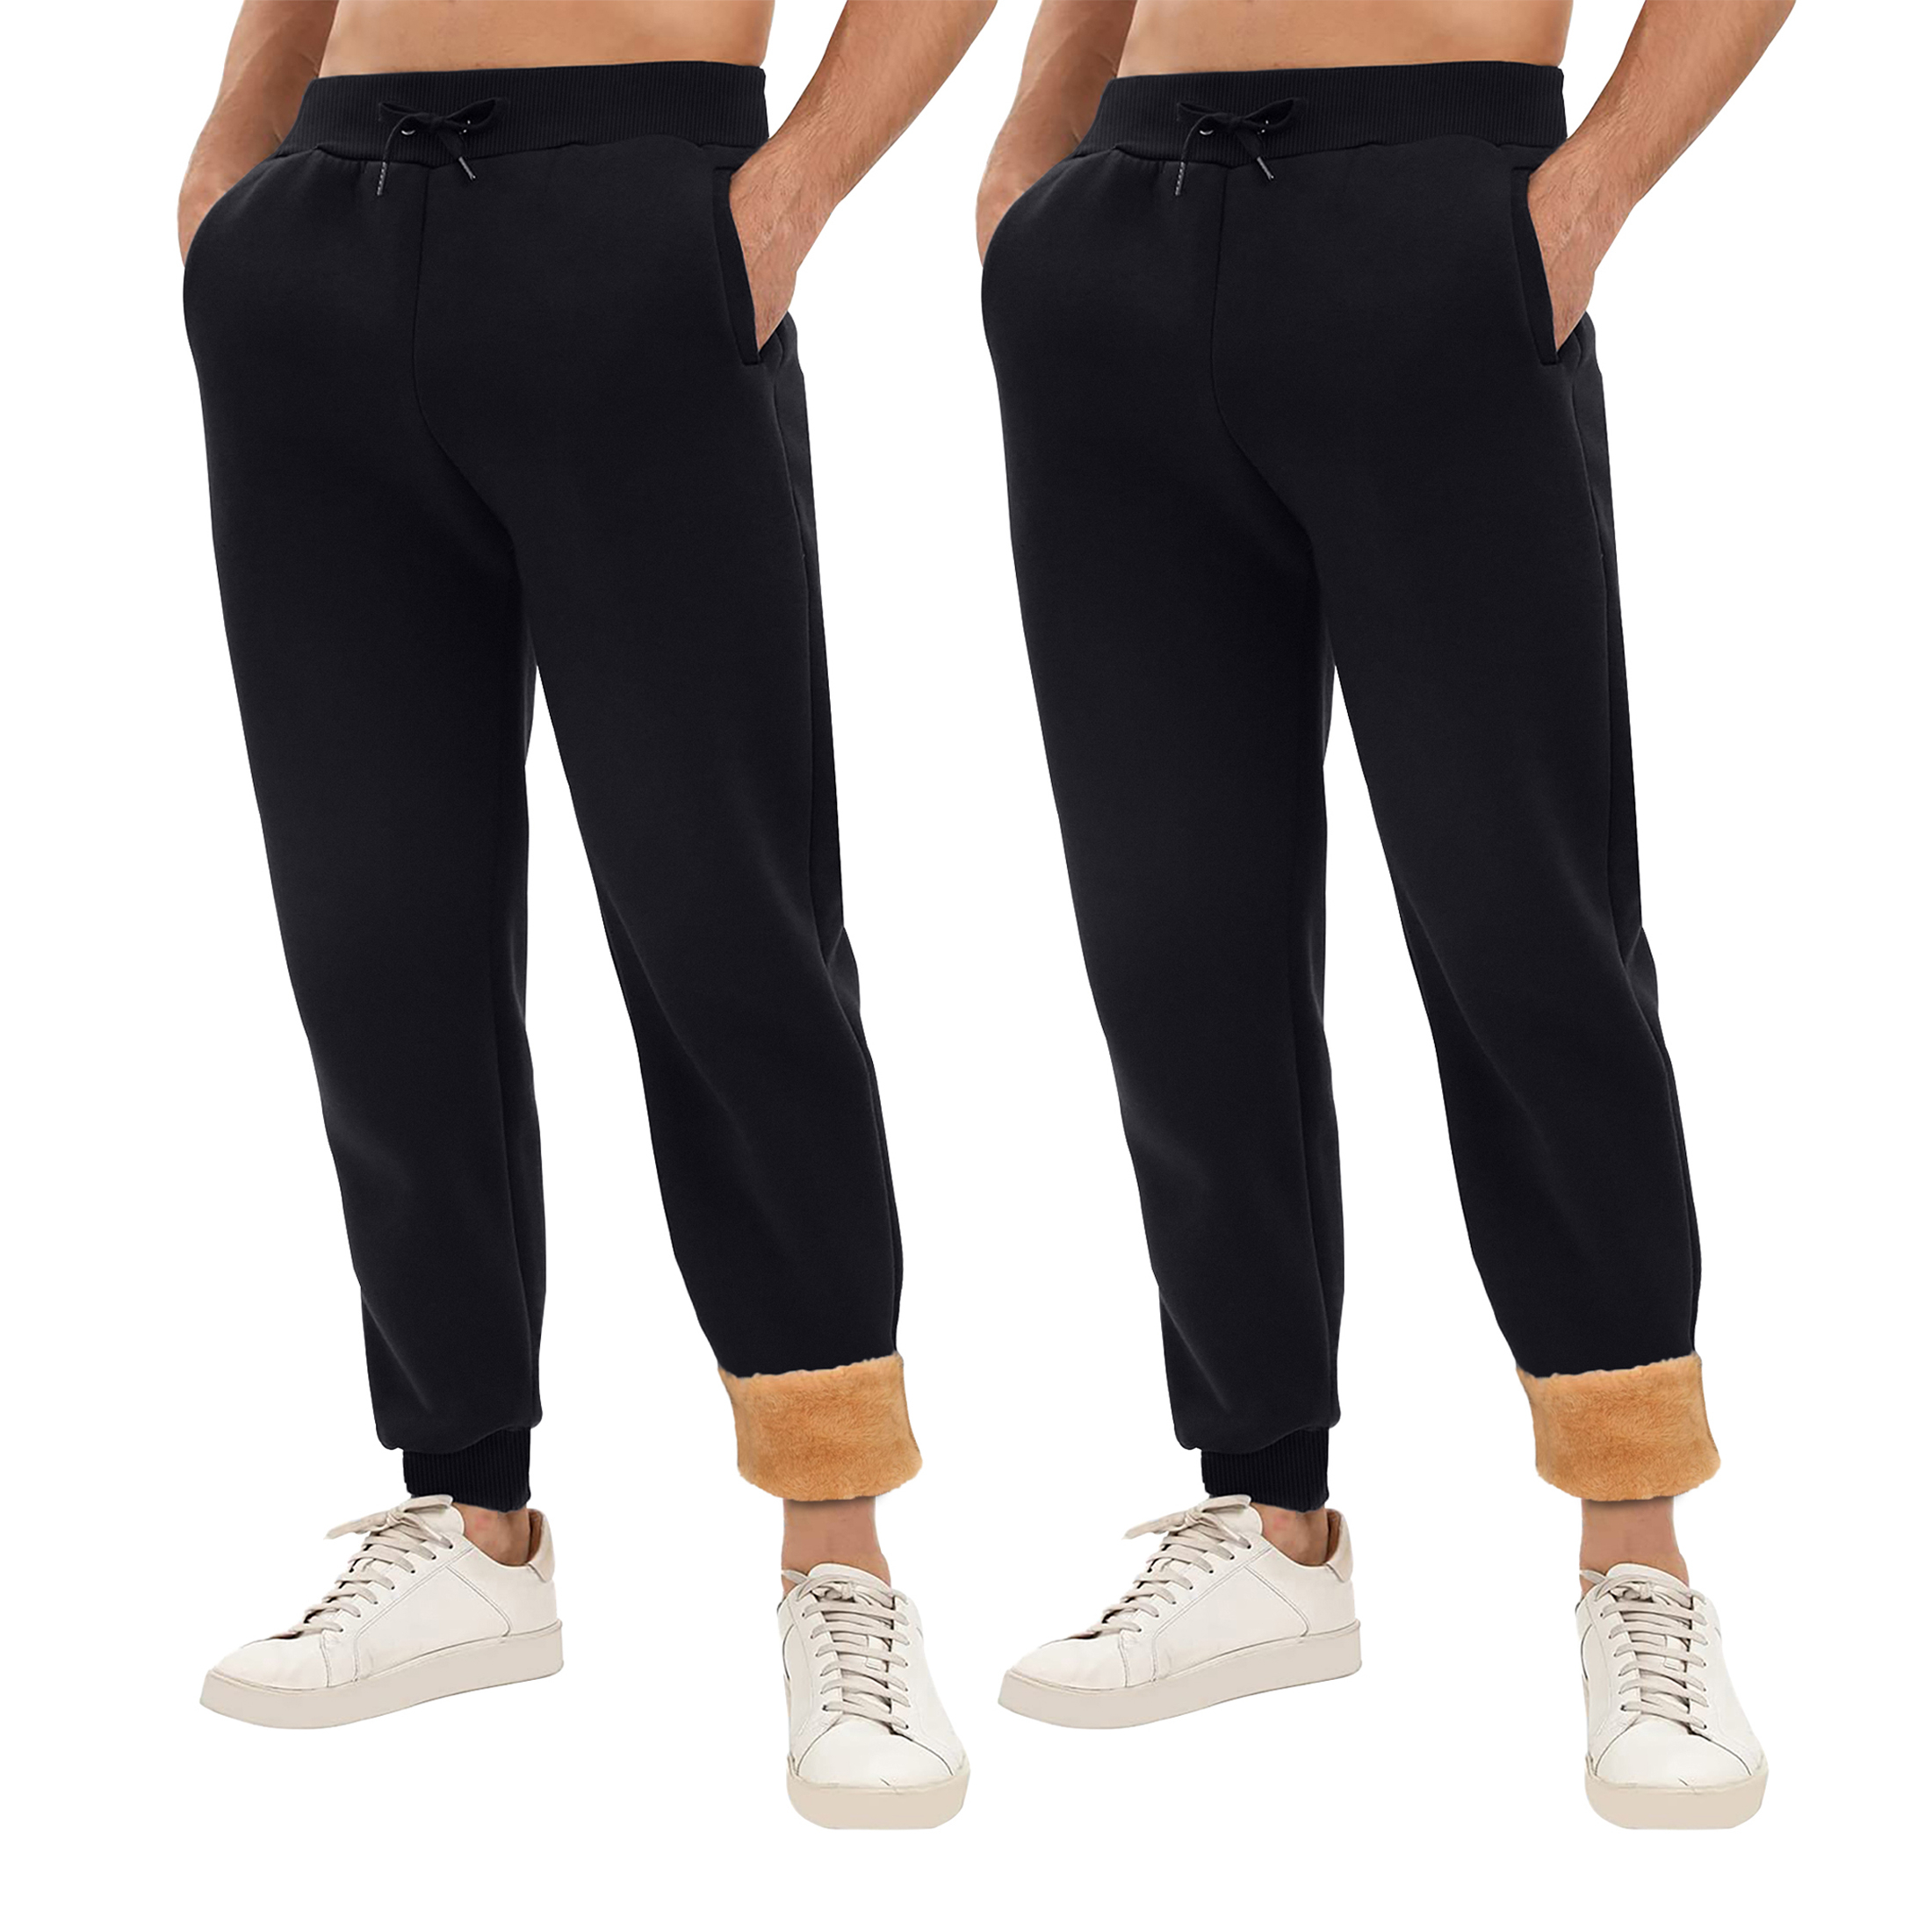 2-Pack: Men's Winter Warm Thick Sherpa Lined Jogger Track Pants With Pockets - Black & Navy, Large